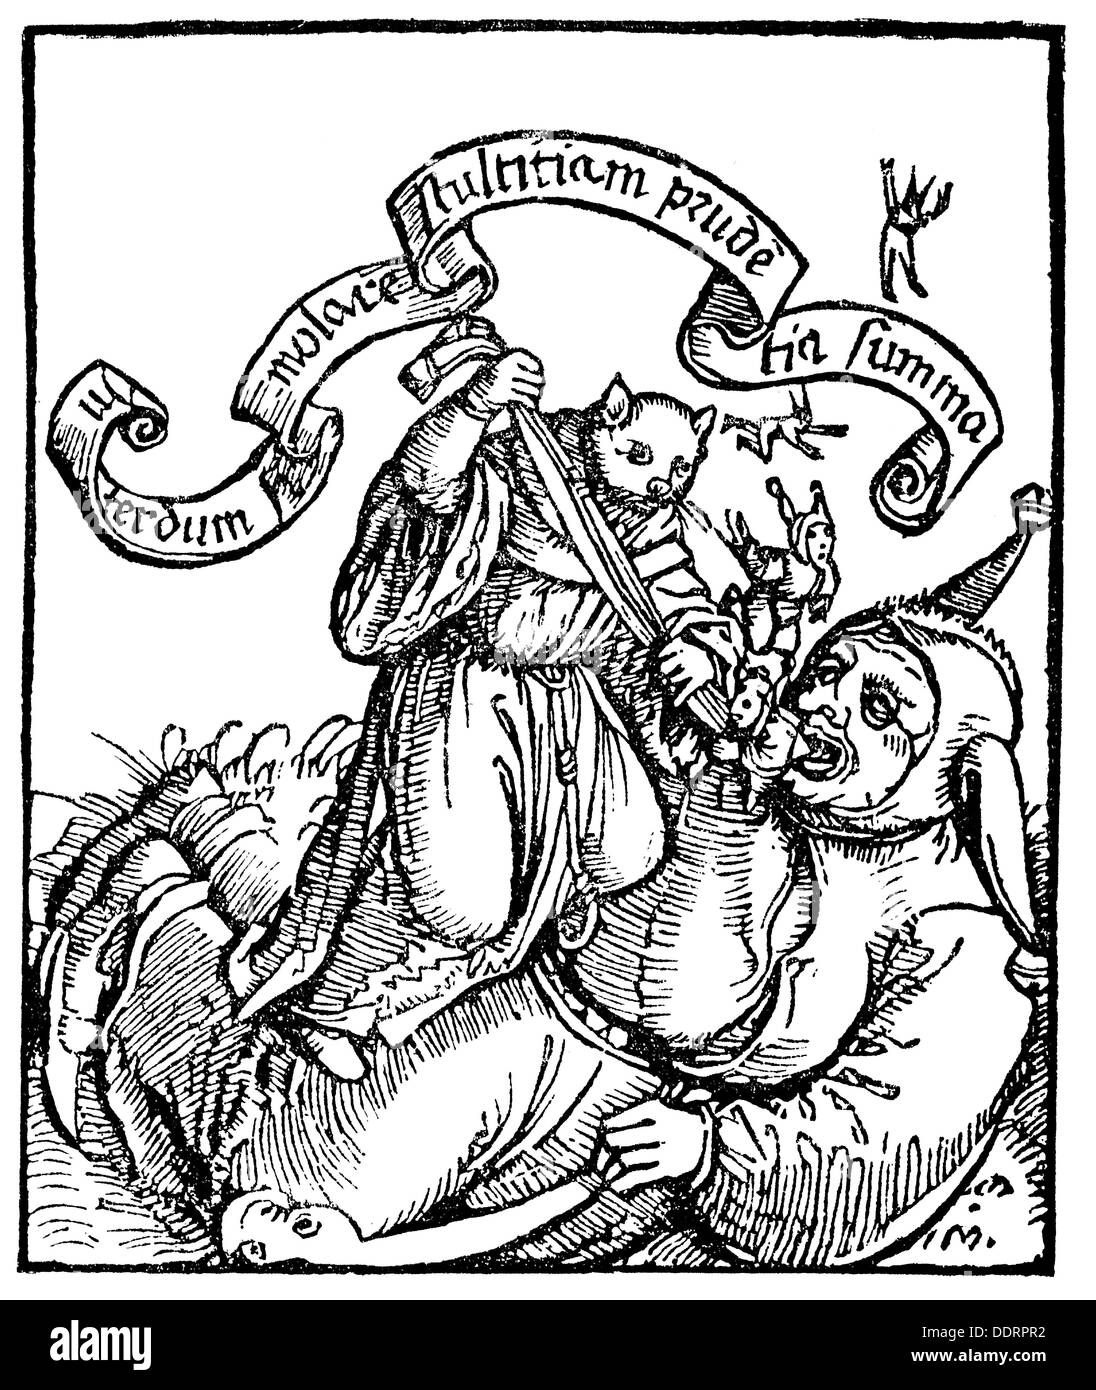 Murner, Thomas, 24.12.1475 - before 23.8.1537, German clergyman, humanist and author / writer, works, 'Von dem grossen lutherischen Narren' (About the Great Fool Luther), title, woodcut, Strasbourg, 1522, Stock Photo